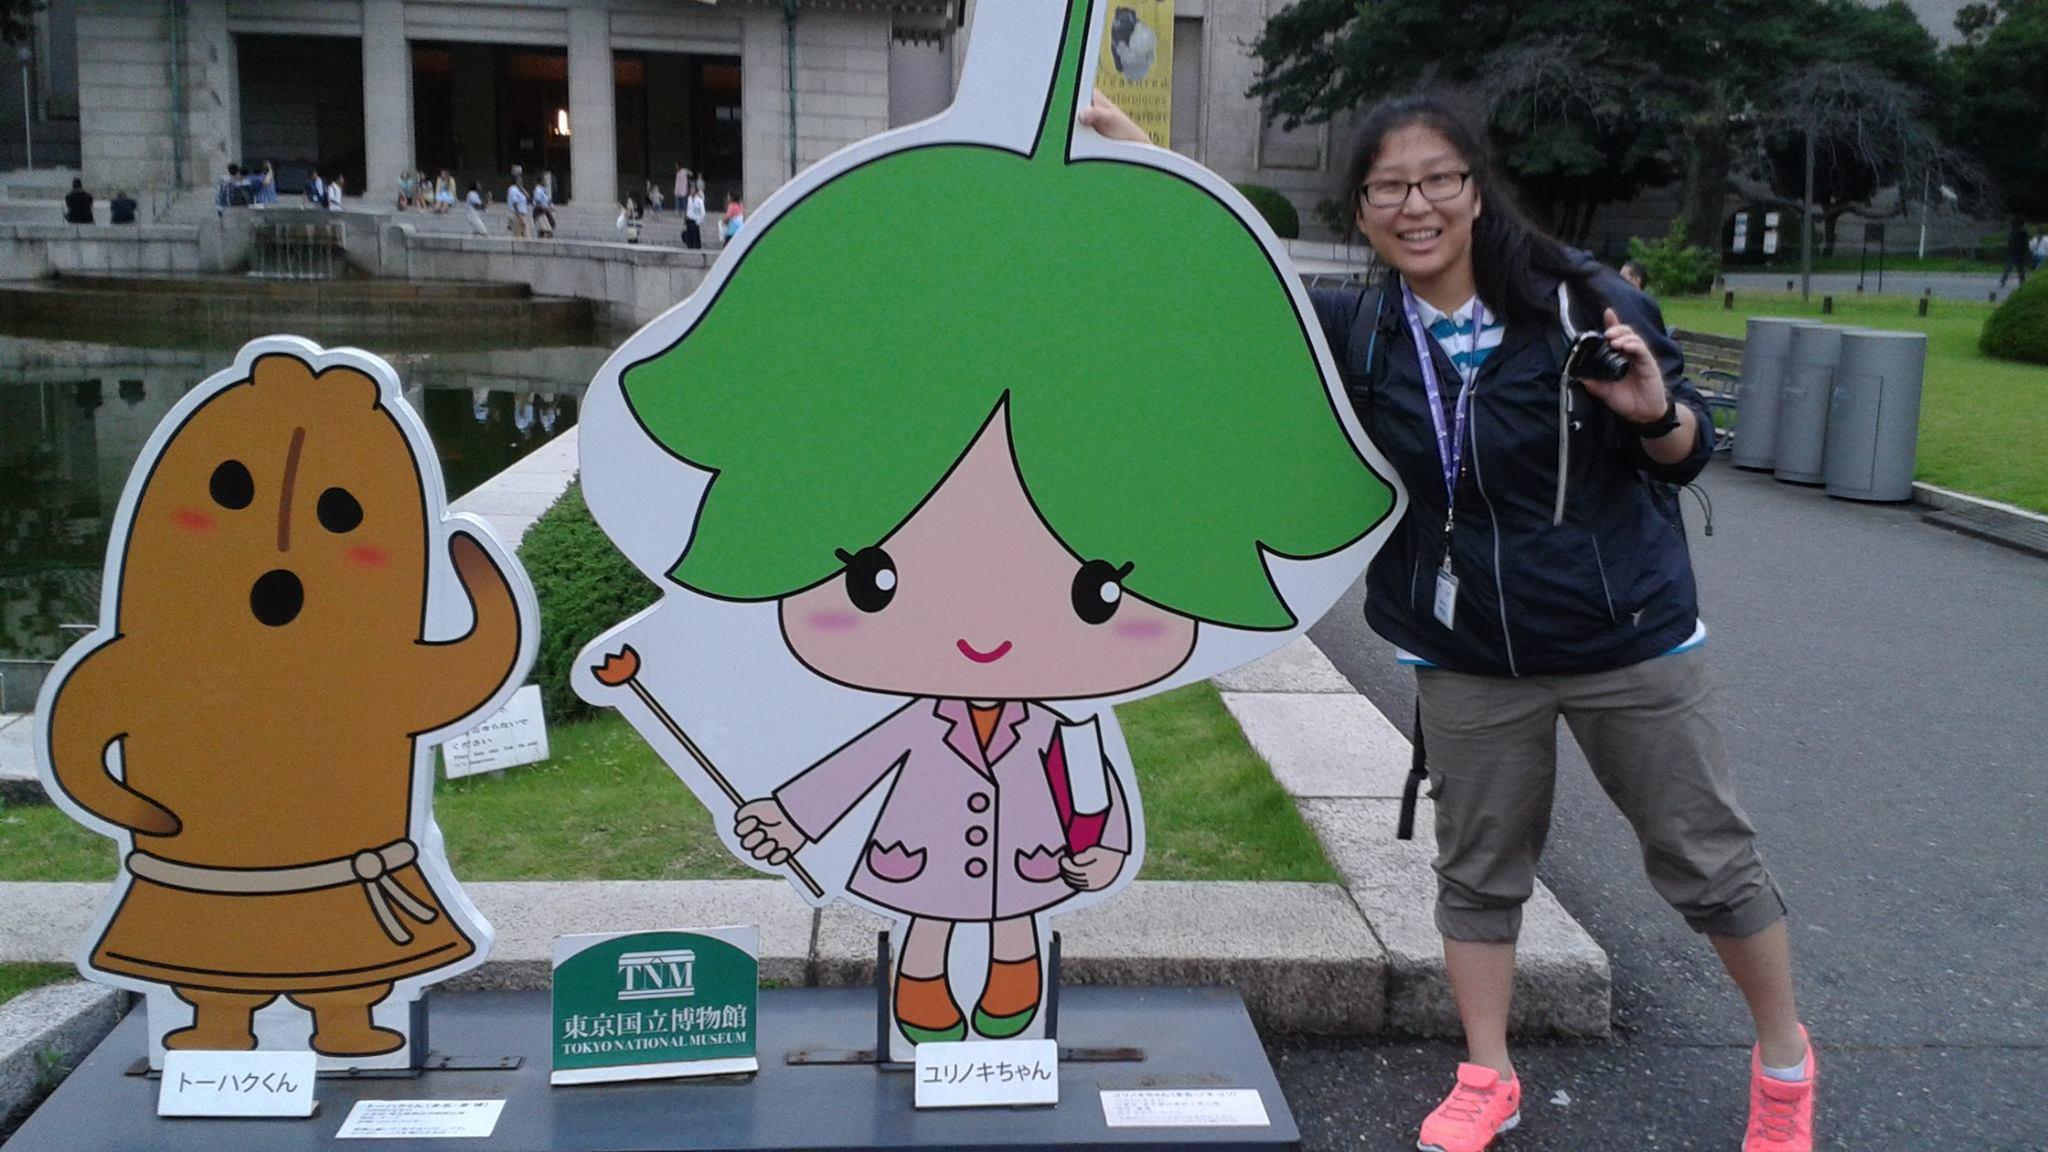 Joice poses while on her trip to Japan. Photo  courtesy of Joice Im